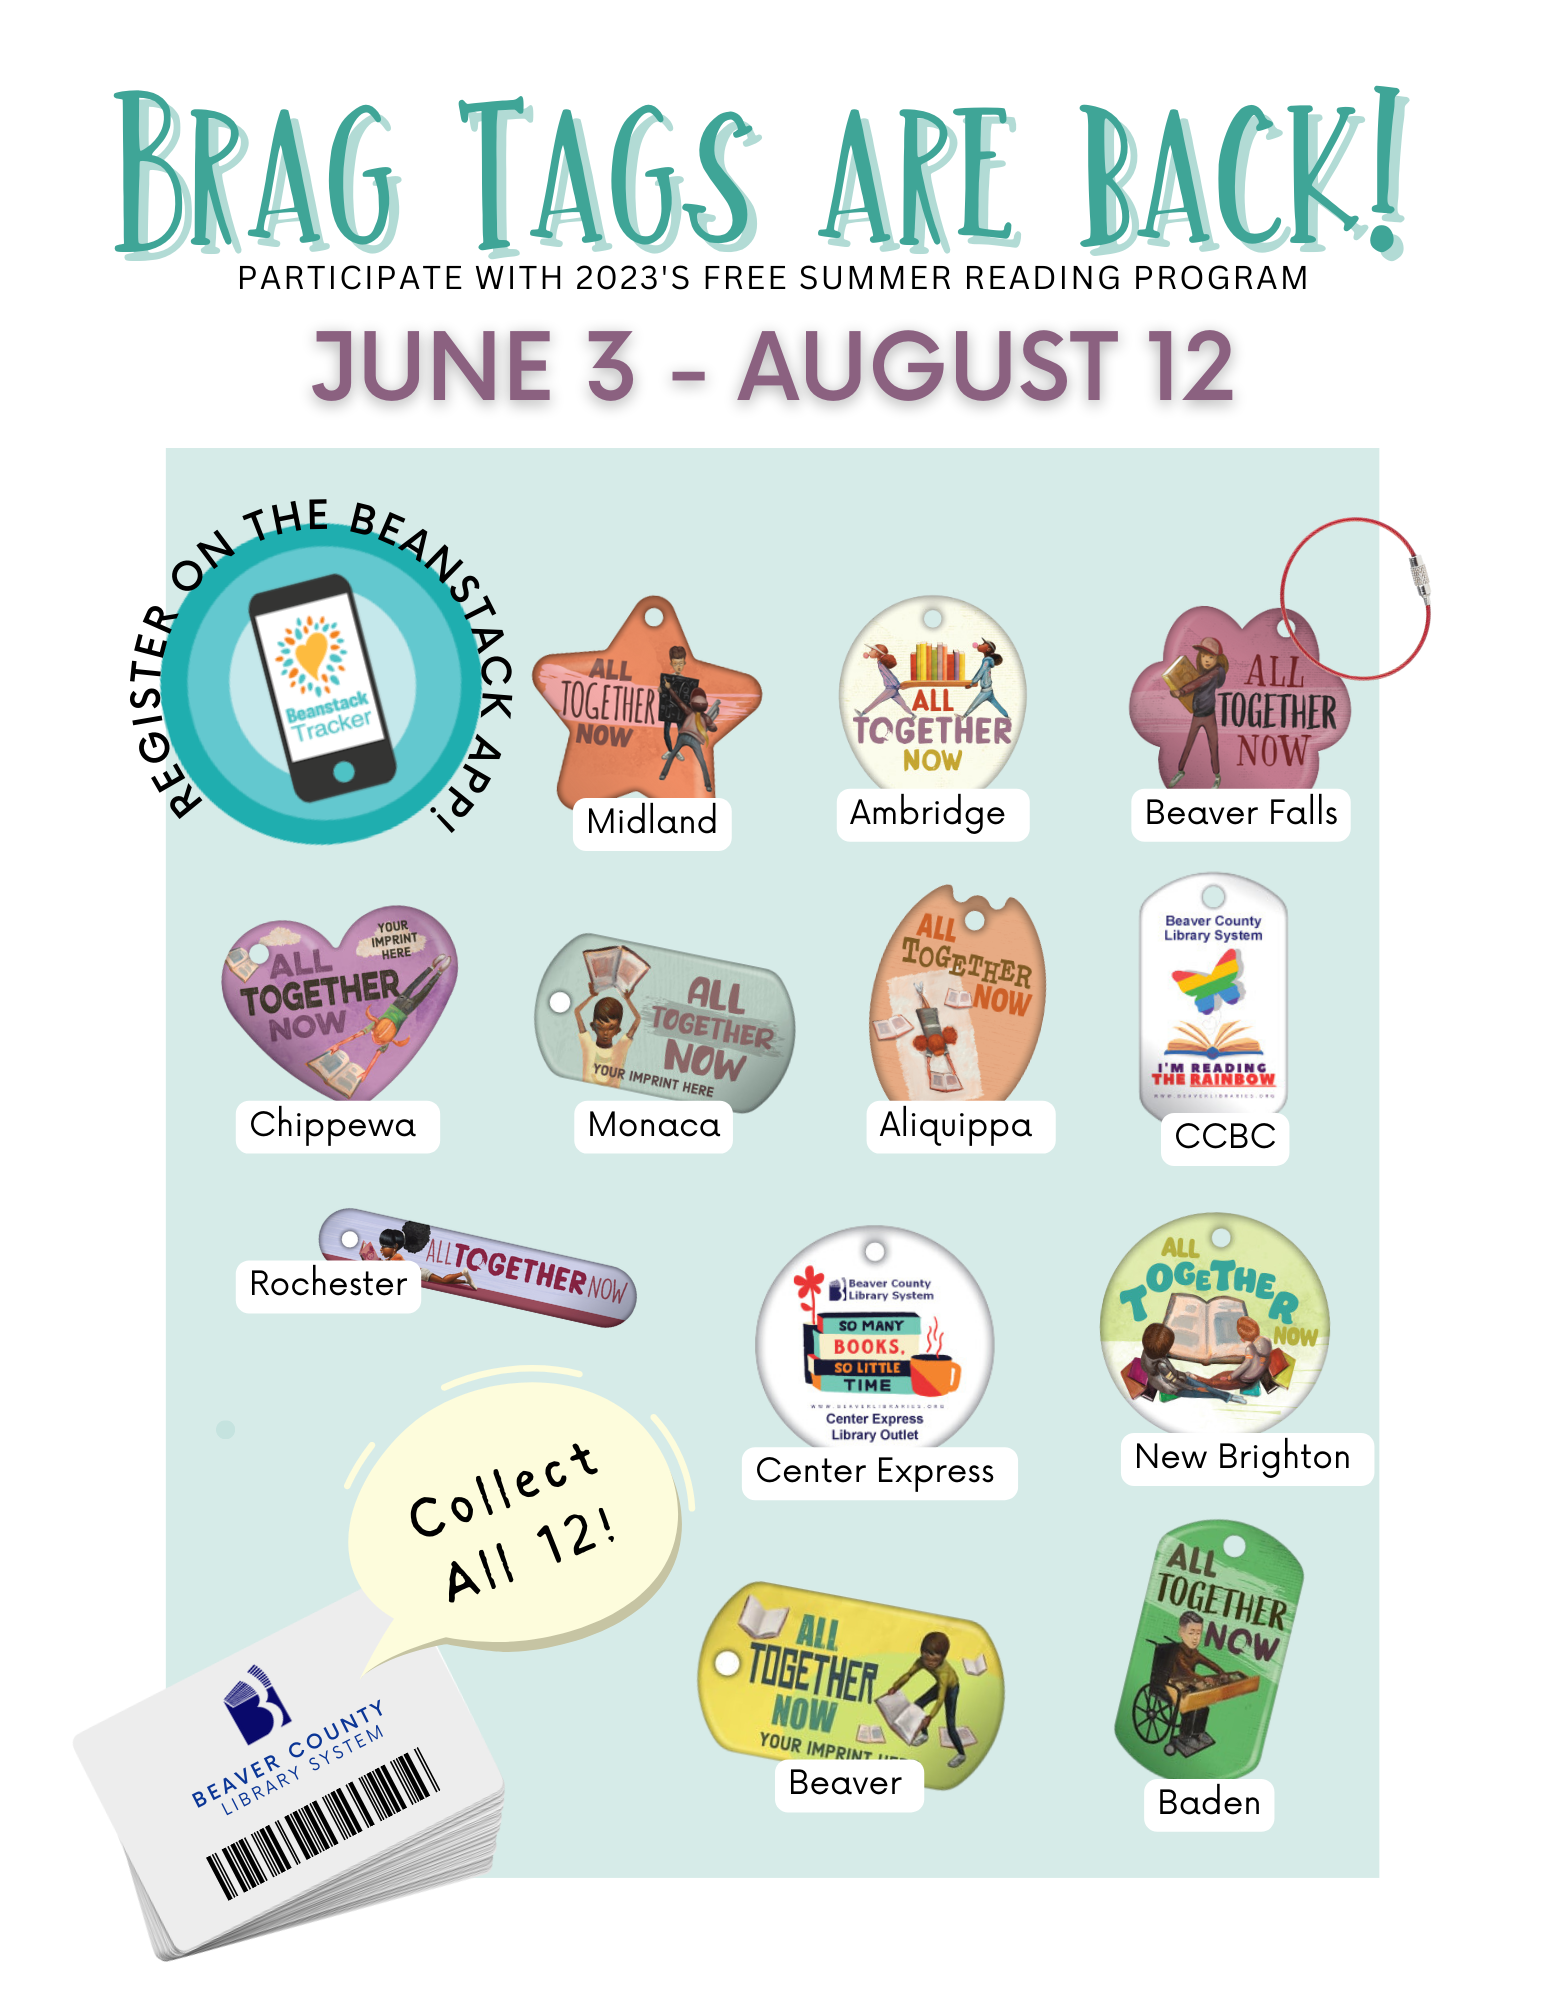 Brag tags are back! Participate with 2023's free summer reading program.